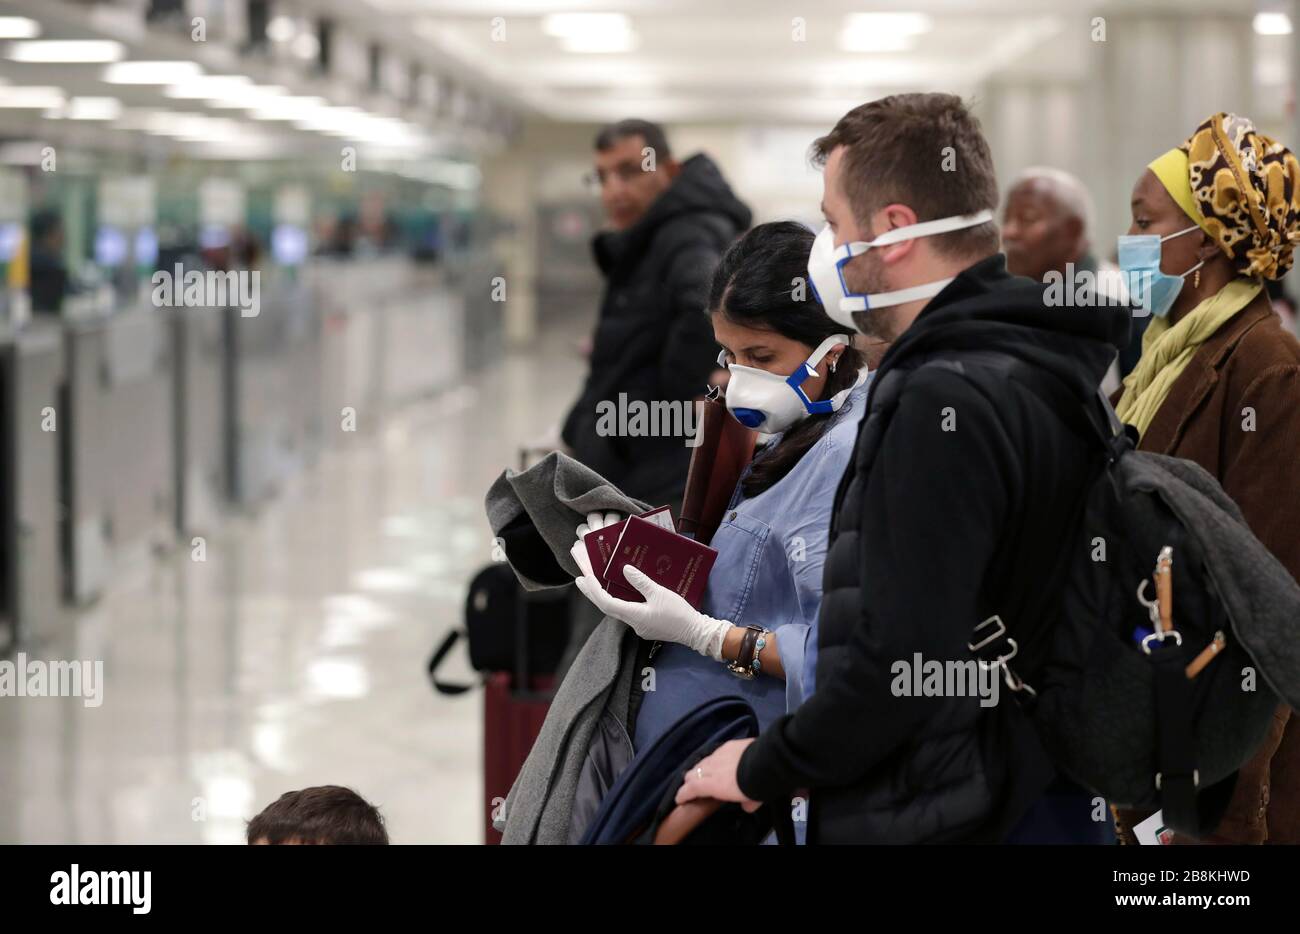 Passengers arriving at Dulles International Airport wearing personal protective equipment March 13, 2020 in Dulles, Virginia. In response to the COVID-19, coronavirus pandemic CBP officers and travelers have begun wearing gloves and masks as protection from viral exposure. Stock Photo